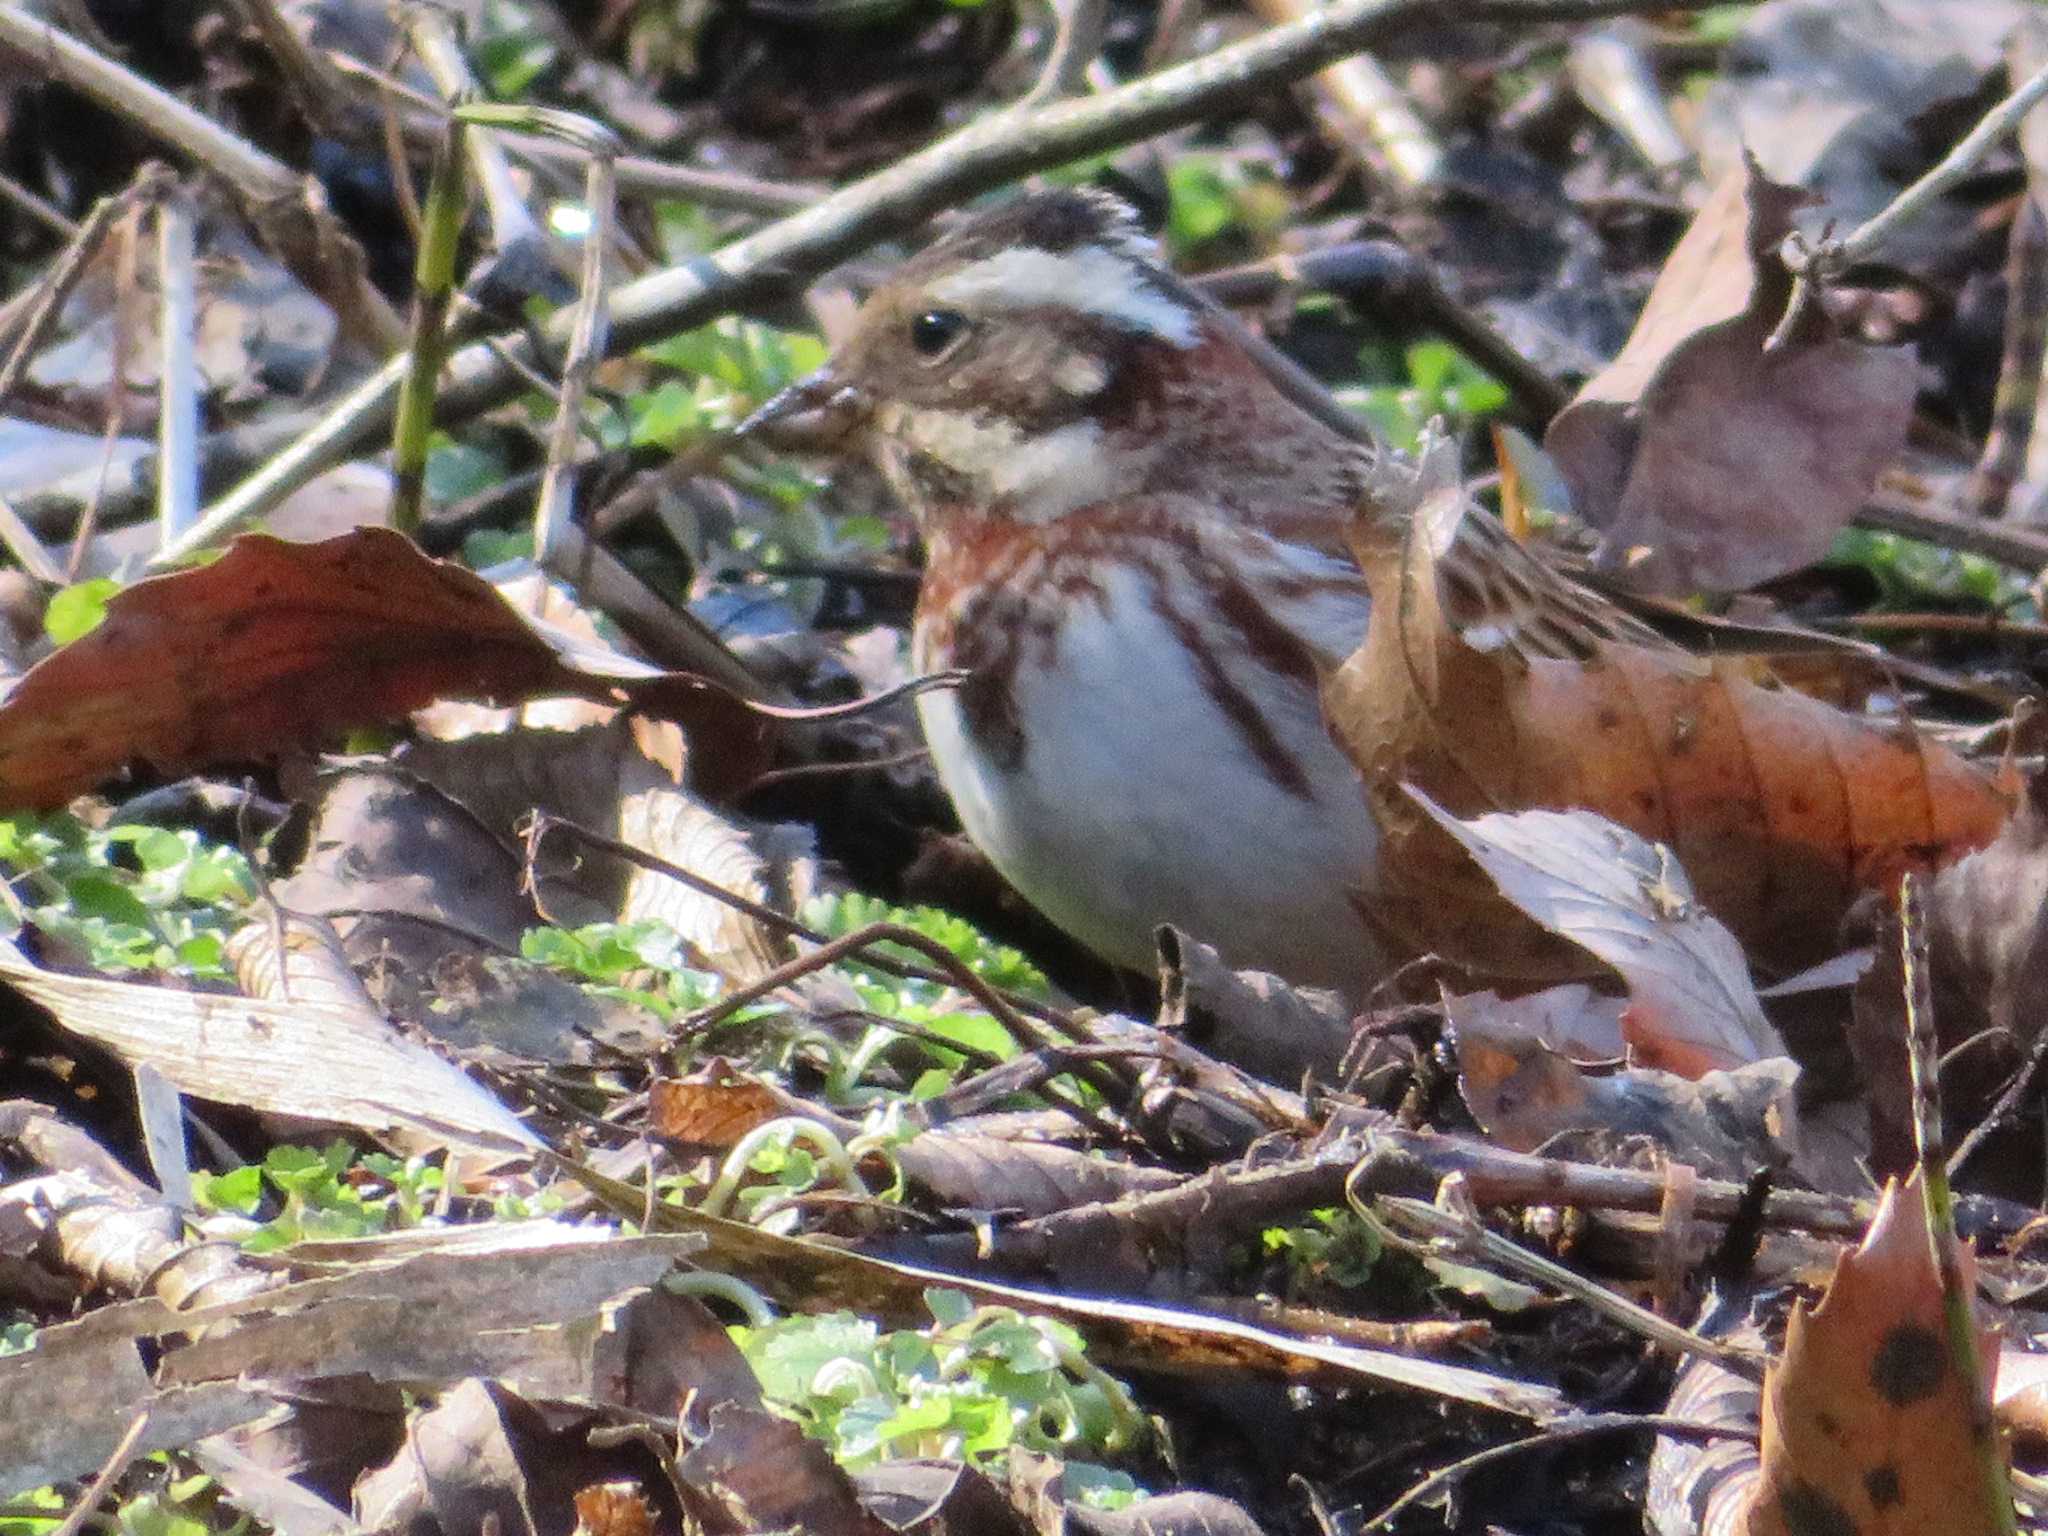 Photo of Rustic Bunting at 神奈川県自然環境保全センター by もー